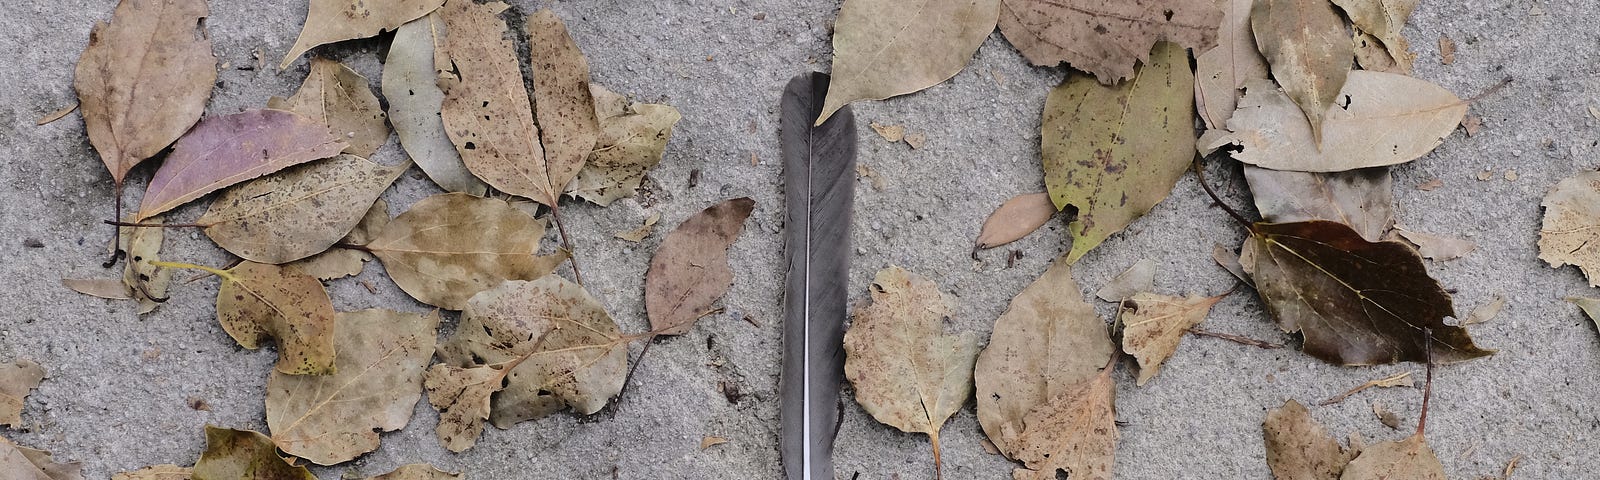 feather and leaves blanketing concrete